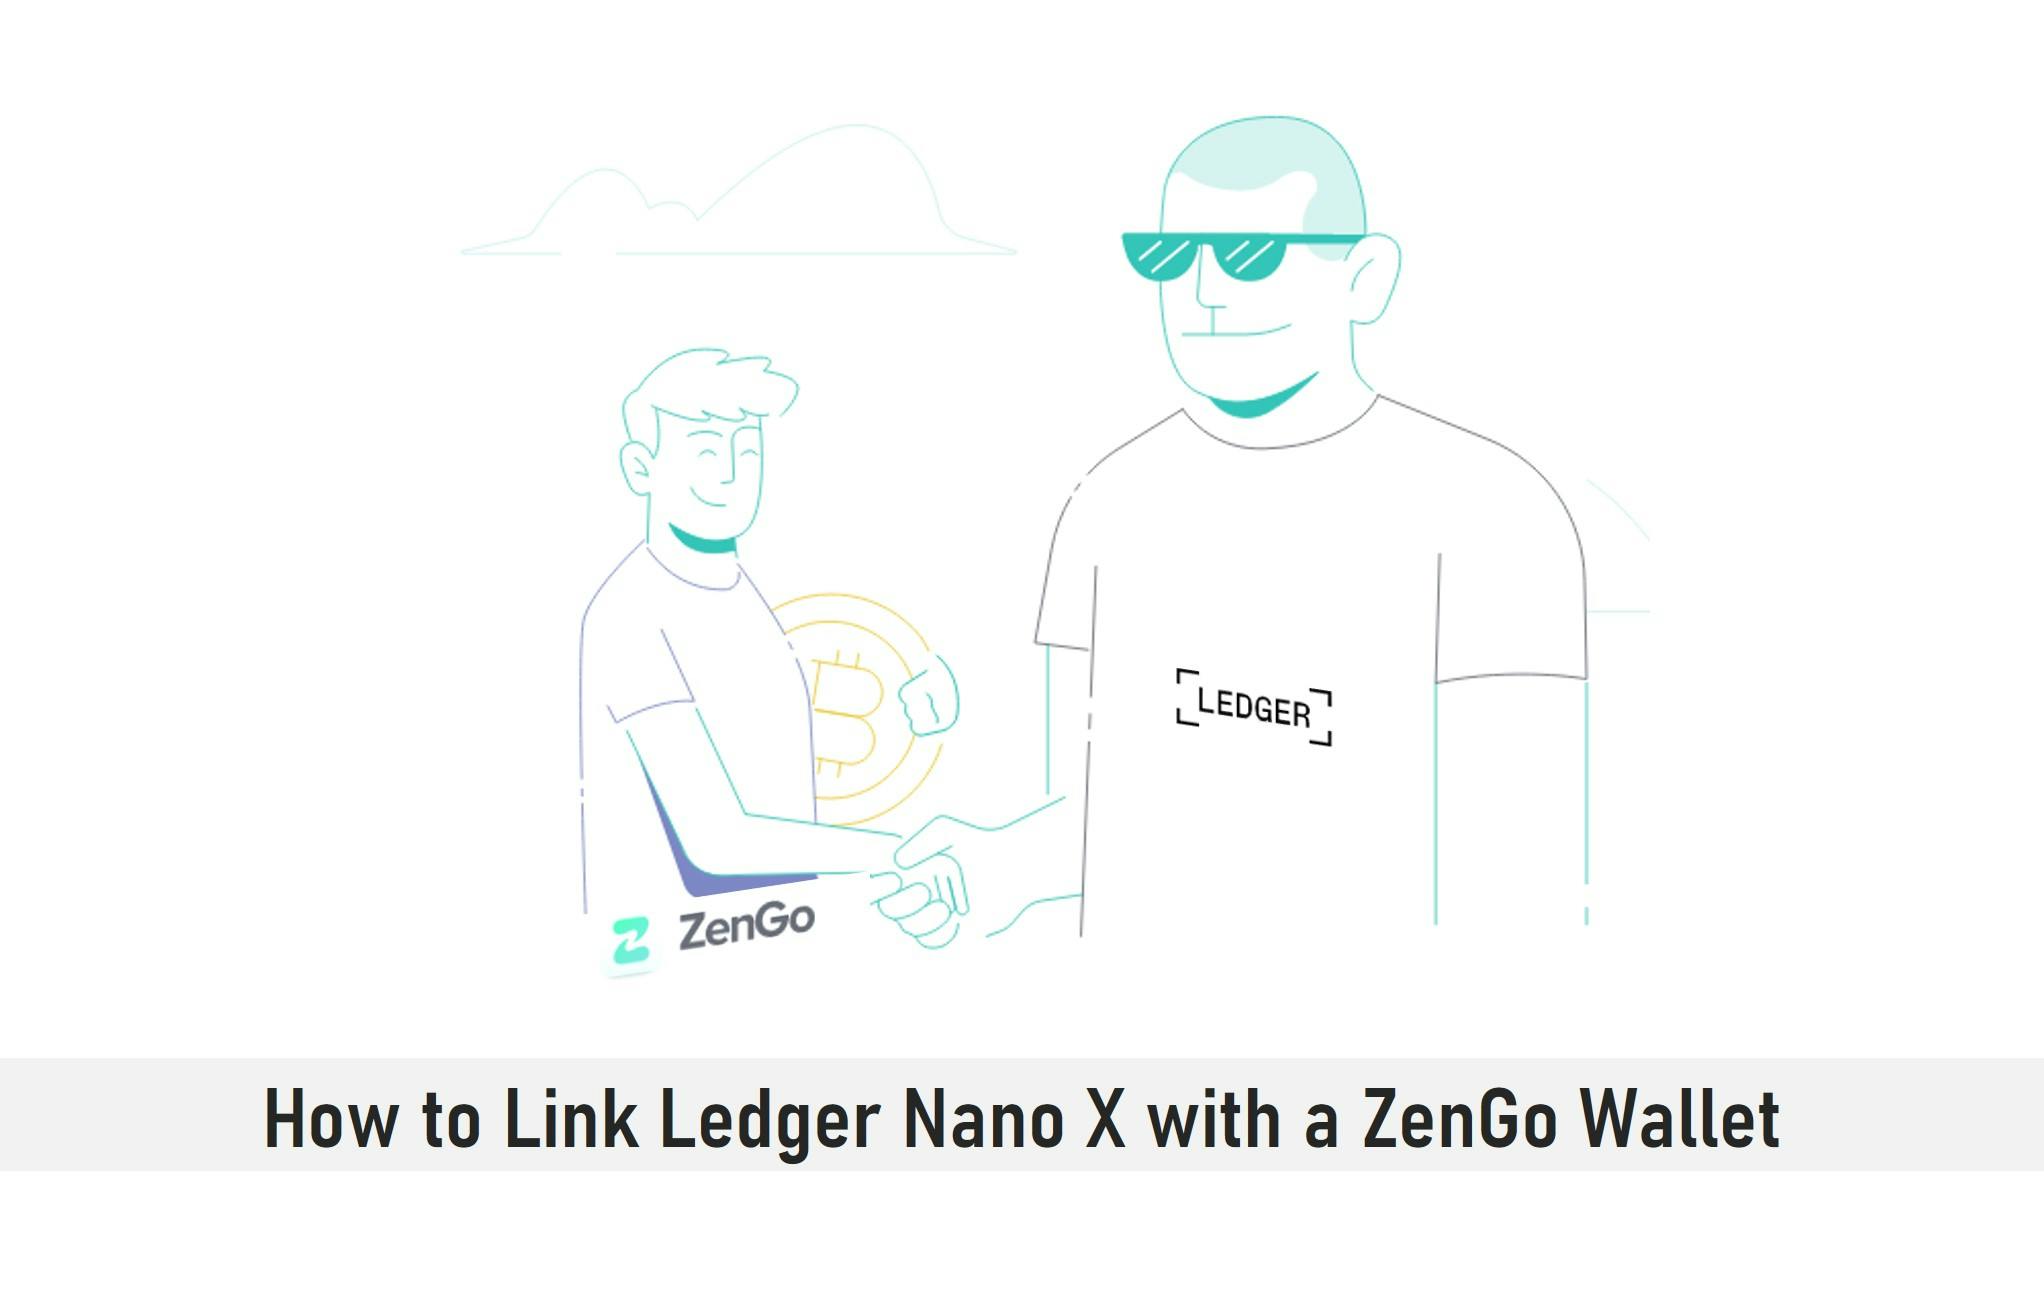 How to Link Ledger Nano X with a ZenGo Wallet